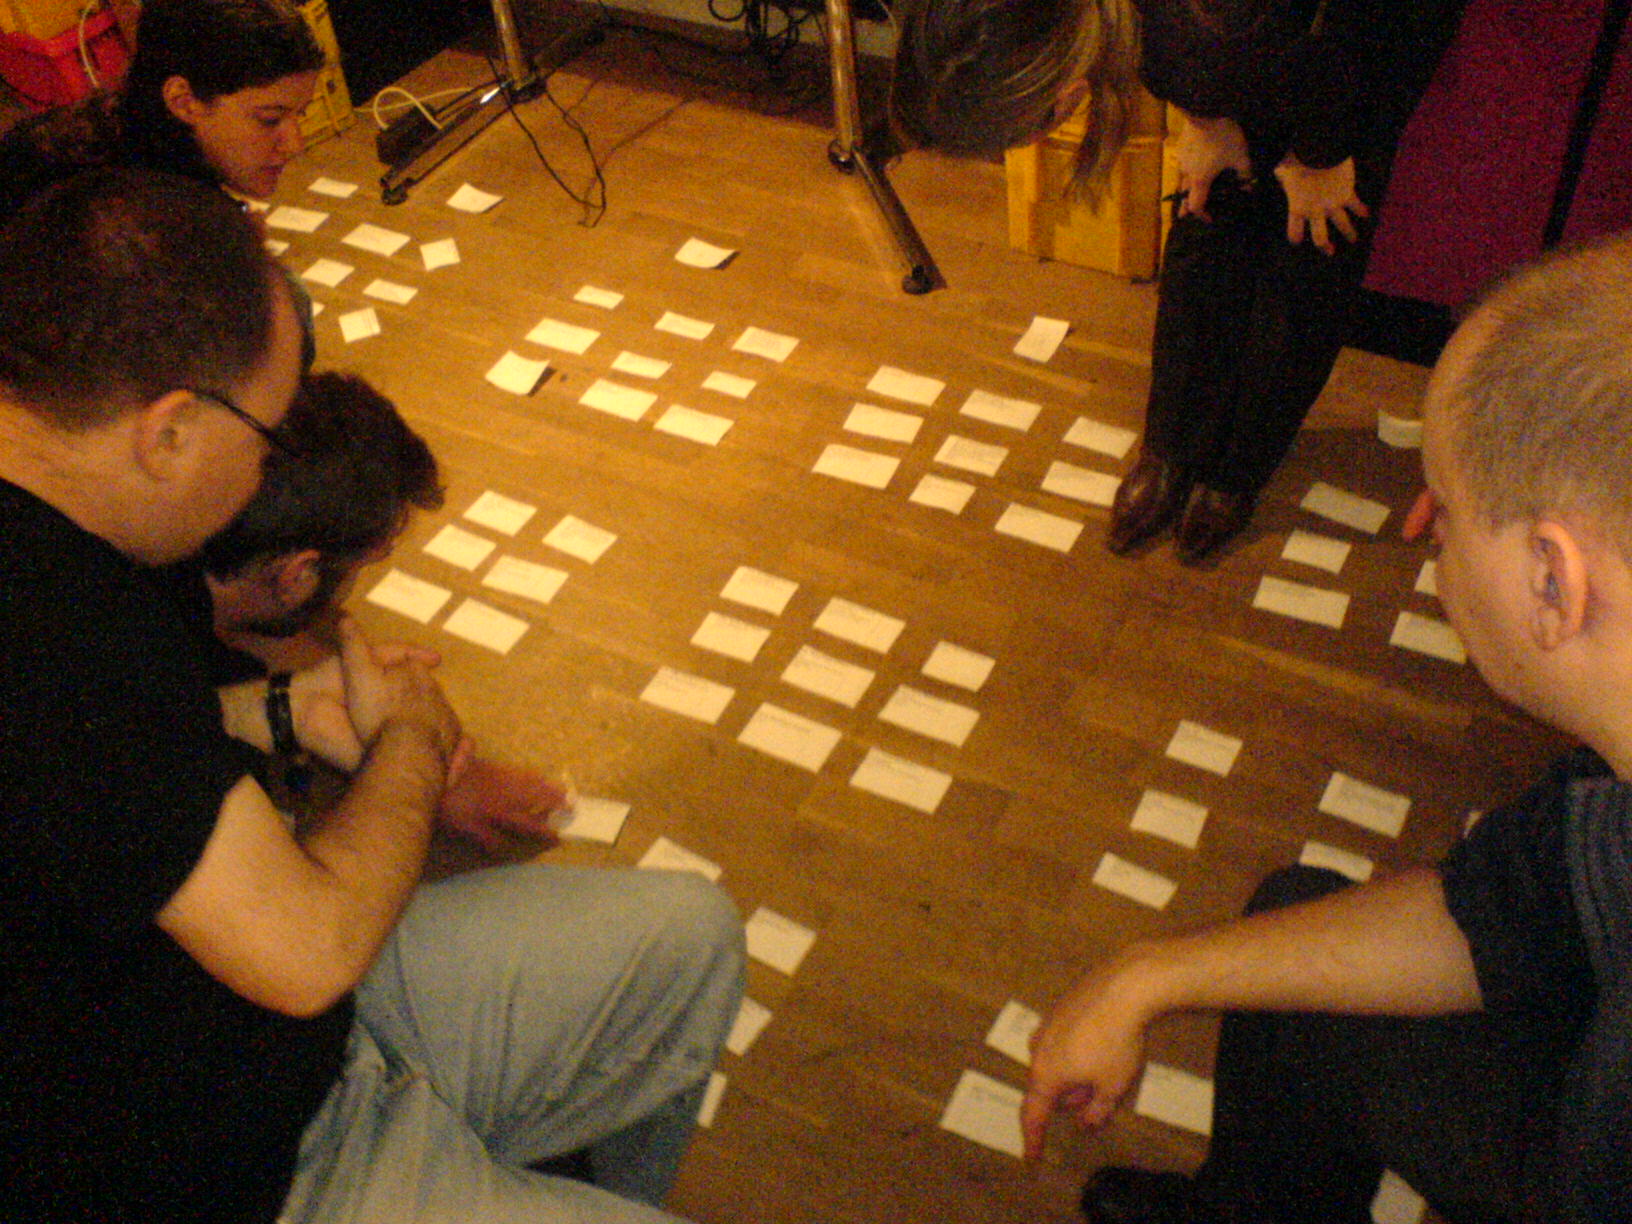 Schedule Making at the 2007-11-03 Content Meeting